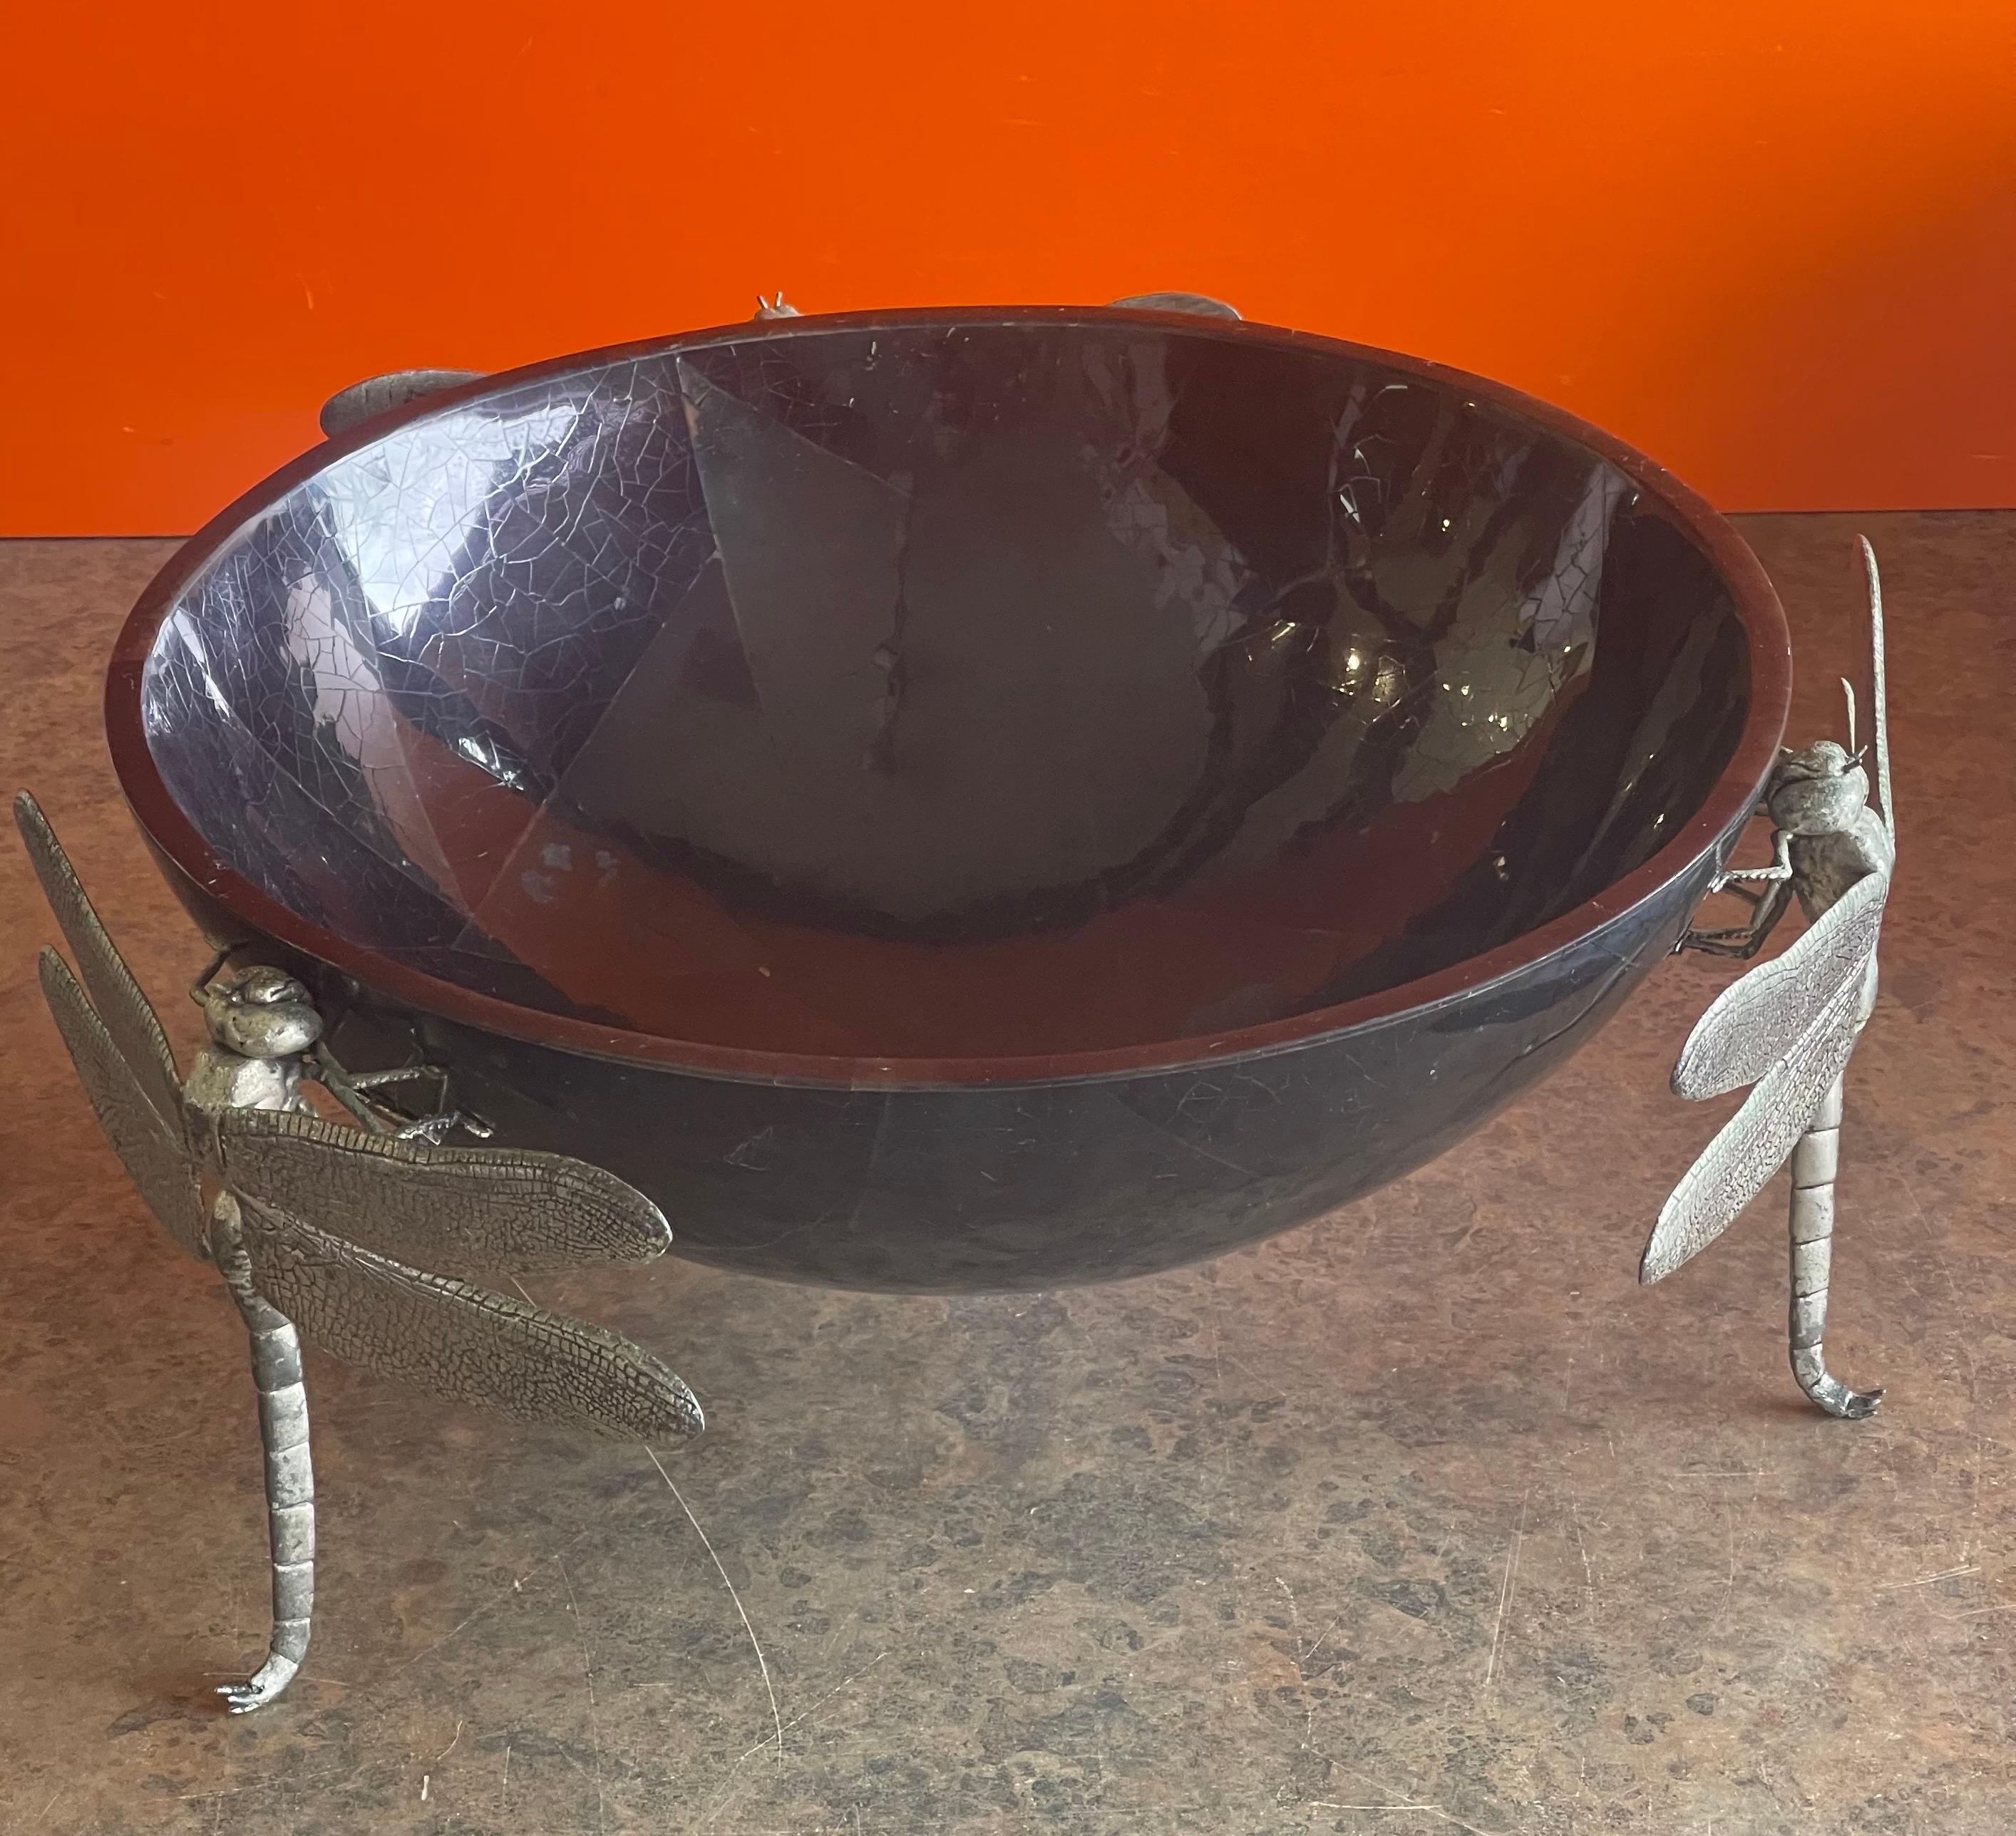 Pewter Large Black Pen Shell Centerpiece Bowl with Dragonfly Feet